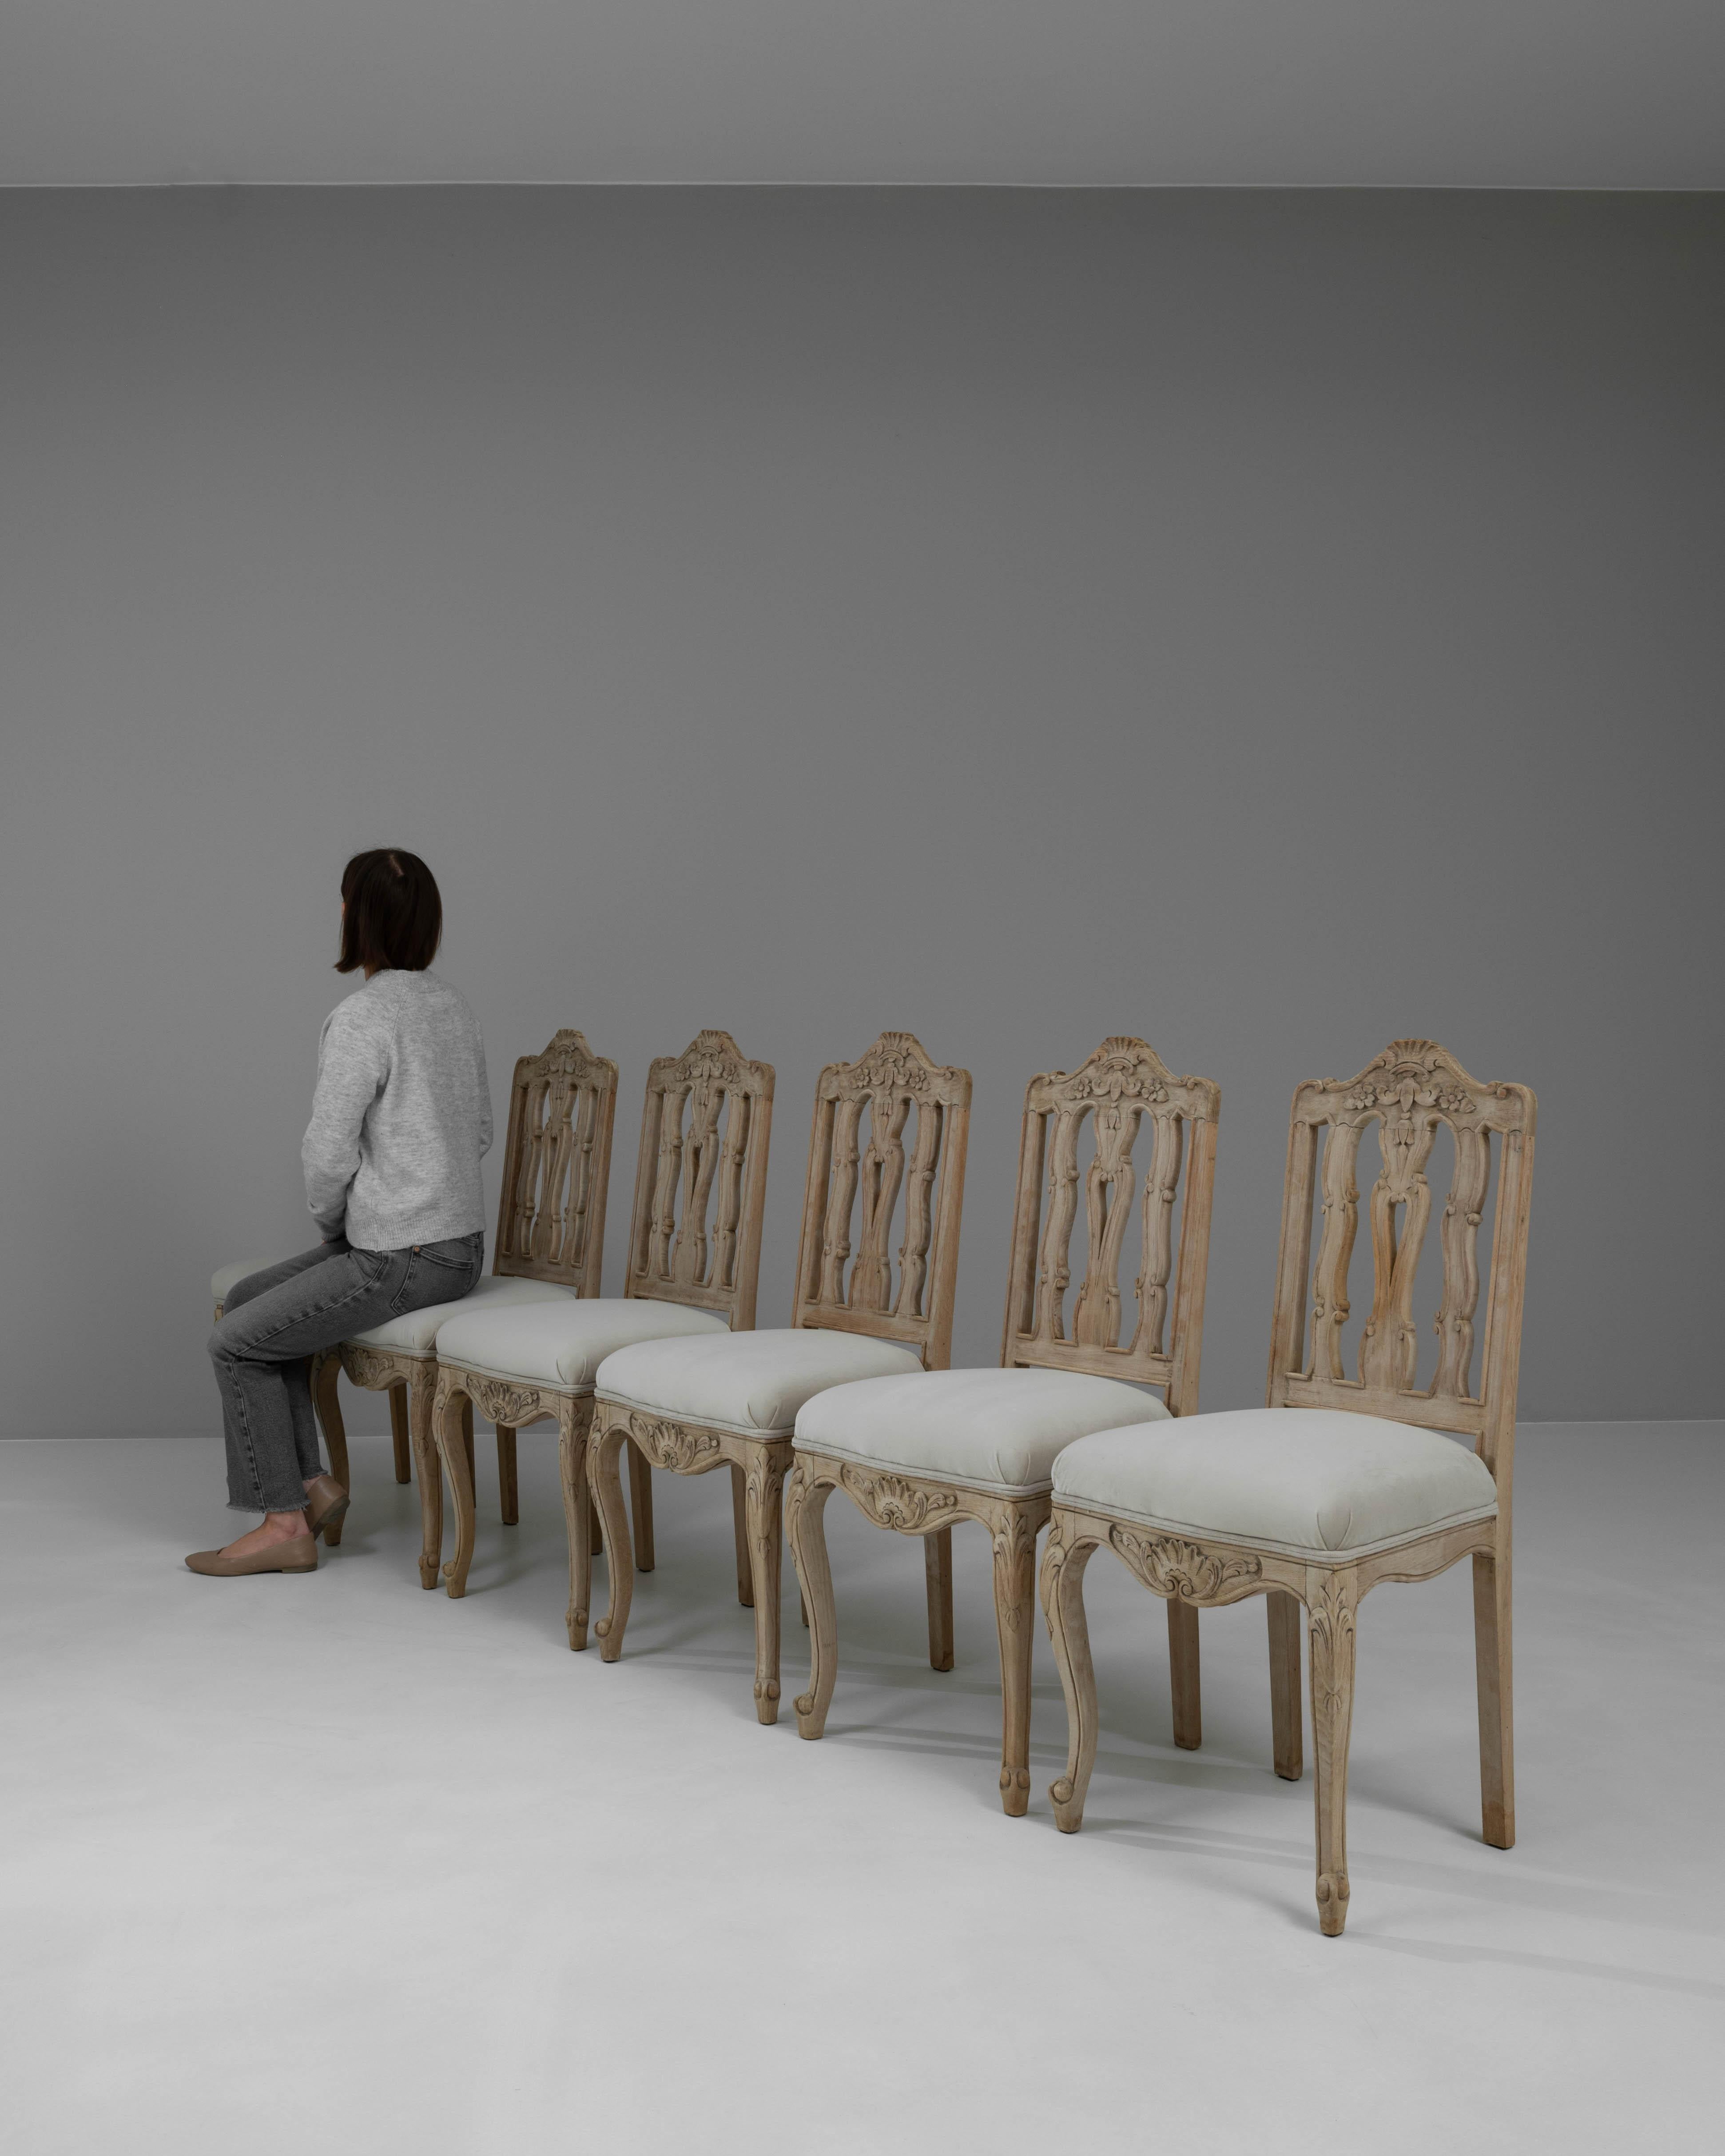 20th Century French Bleached Oak Dining Chairs With Upholstered Seats, Set of 6 For Sale 5